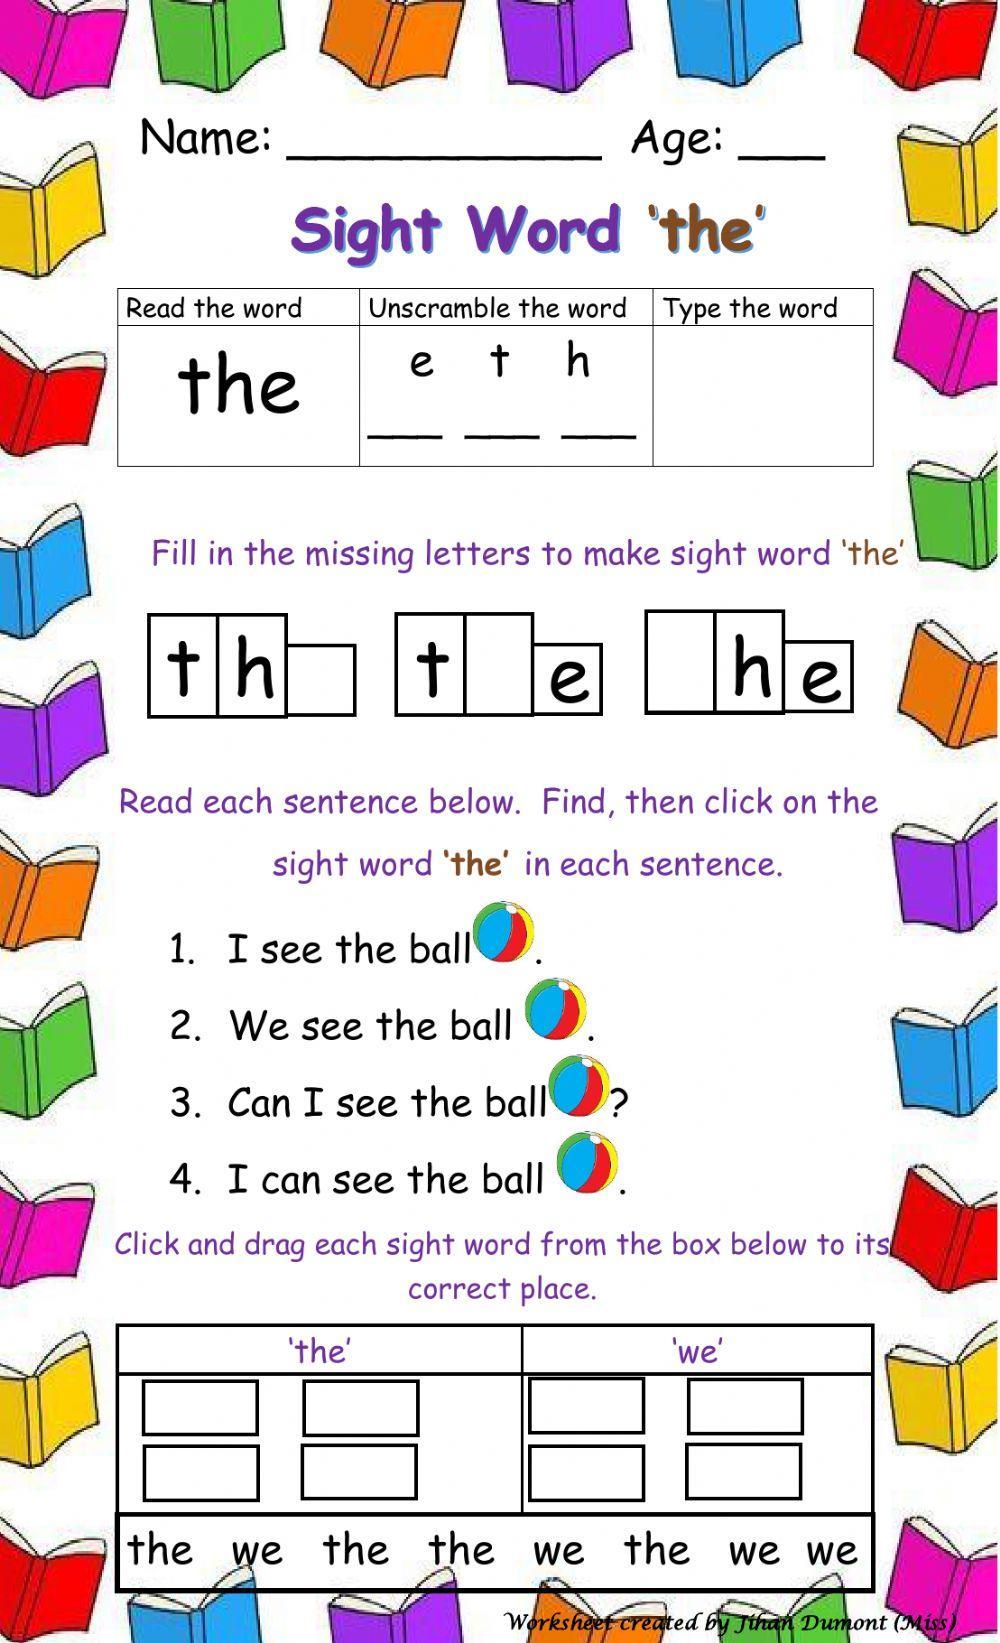 Sight word 'the'